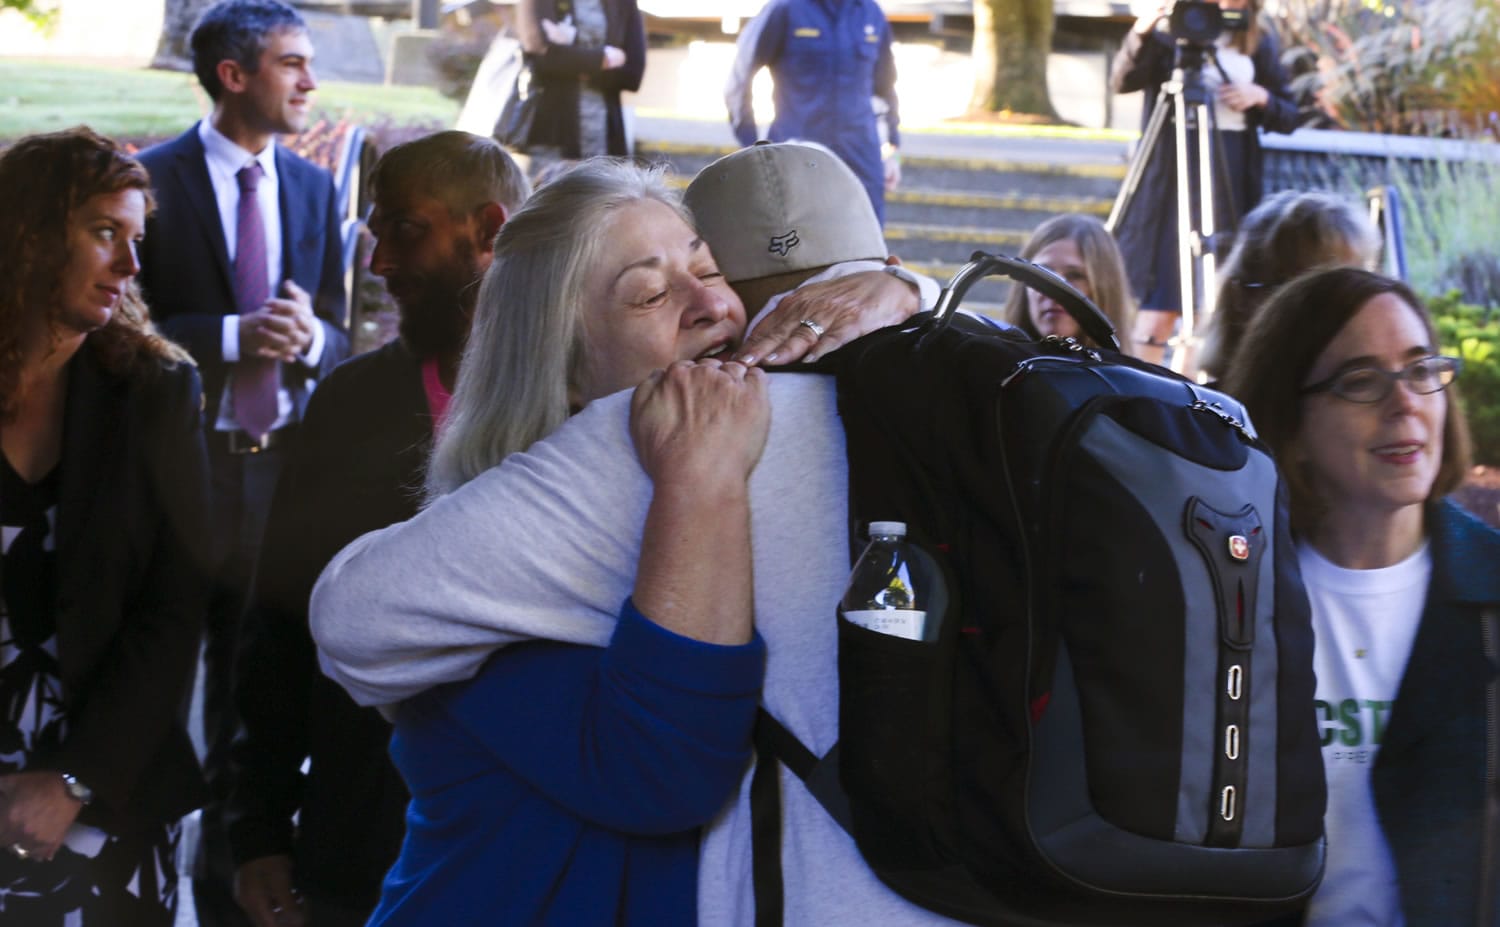 Umpqua Community College interim President Rita Cavin hugs an unidentified student on campus as the school reopens, Oct. 12 after being closed since the multiple fatality shooting on Oct. 1, in Roseburg, Ore.